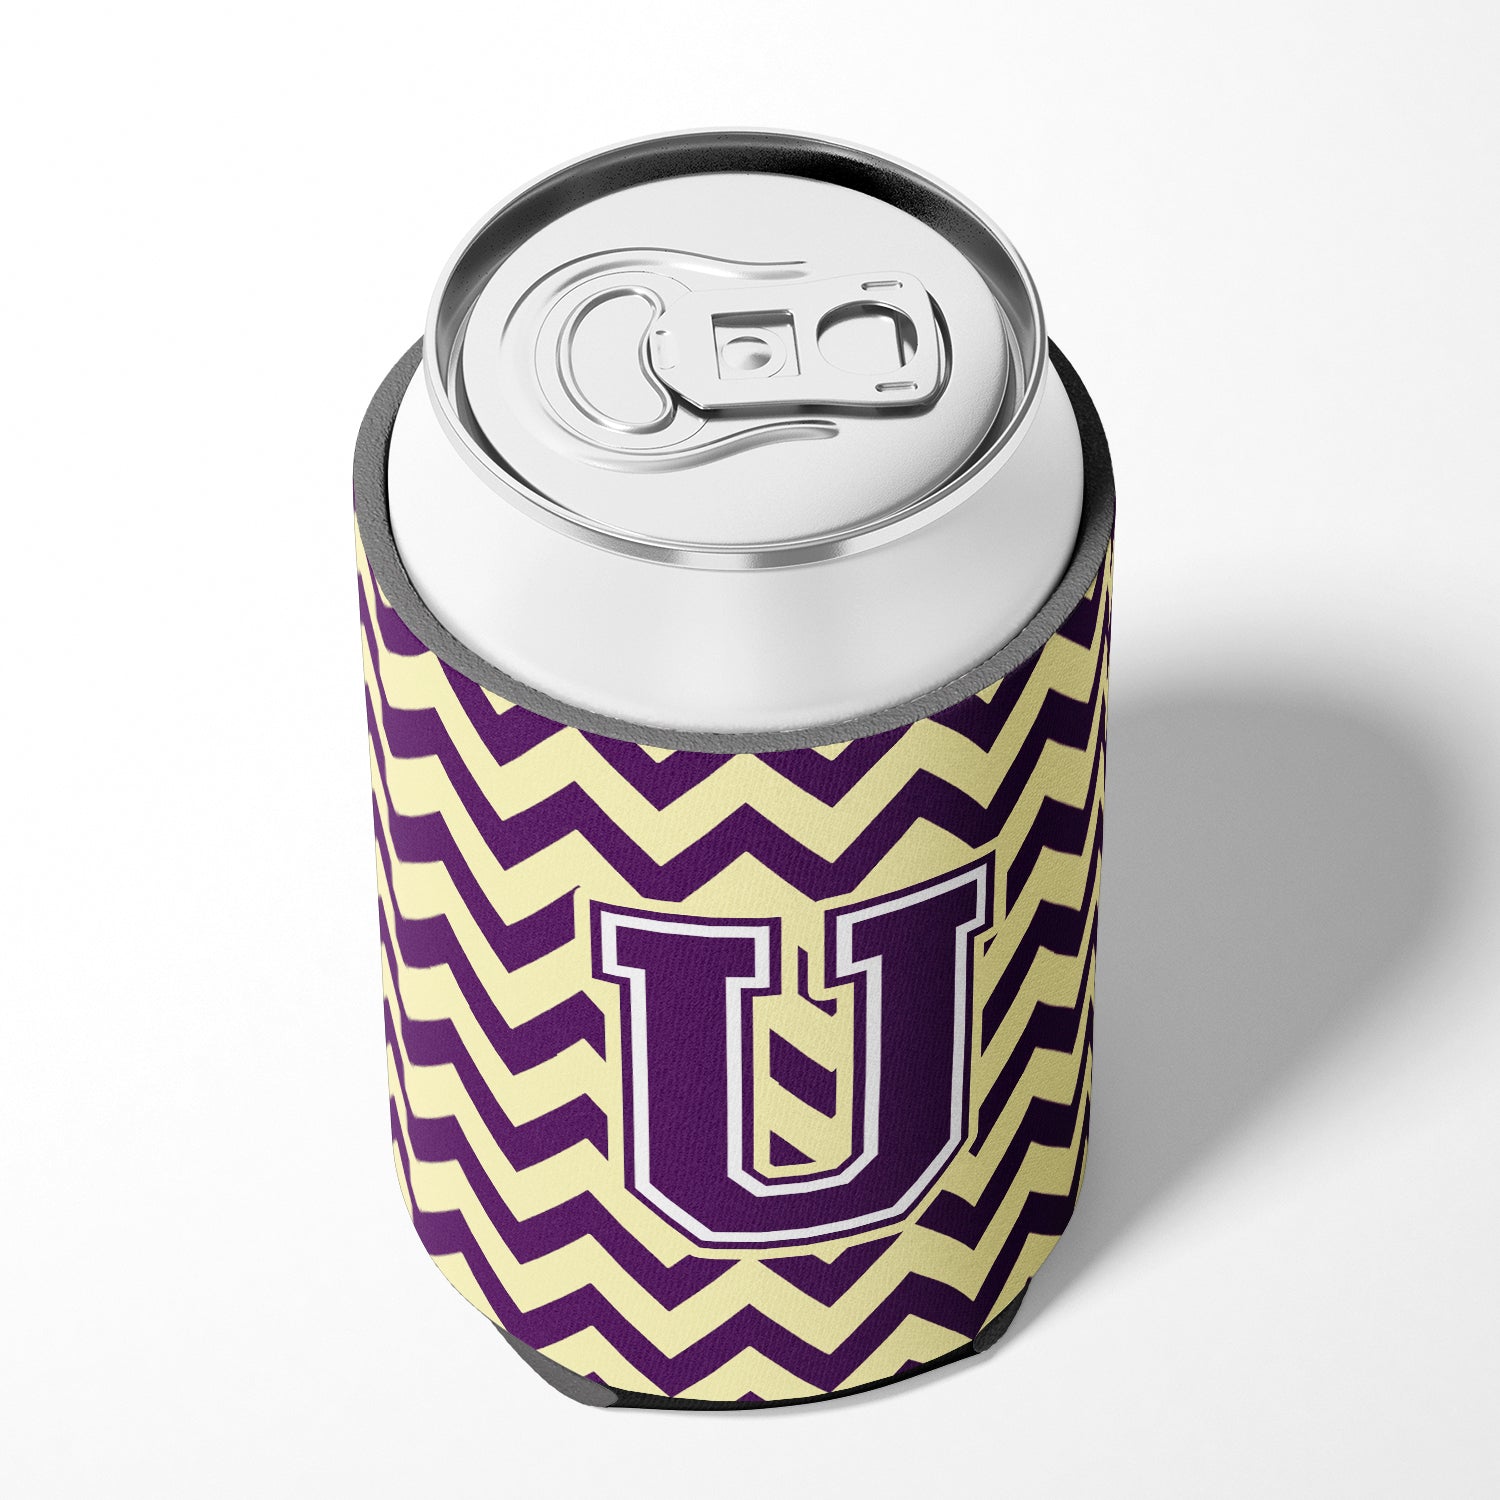 Letter U Chevron Purple and Gold Can or Bottle Hugger CJ1058-UCC.